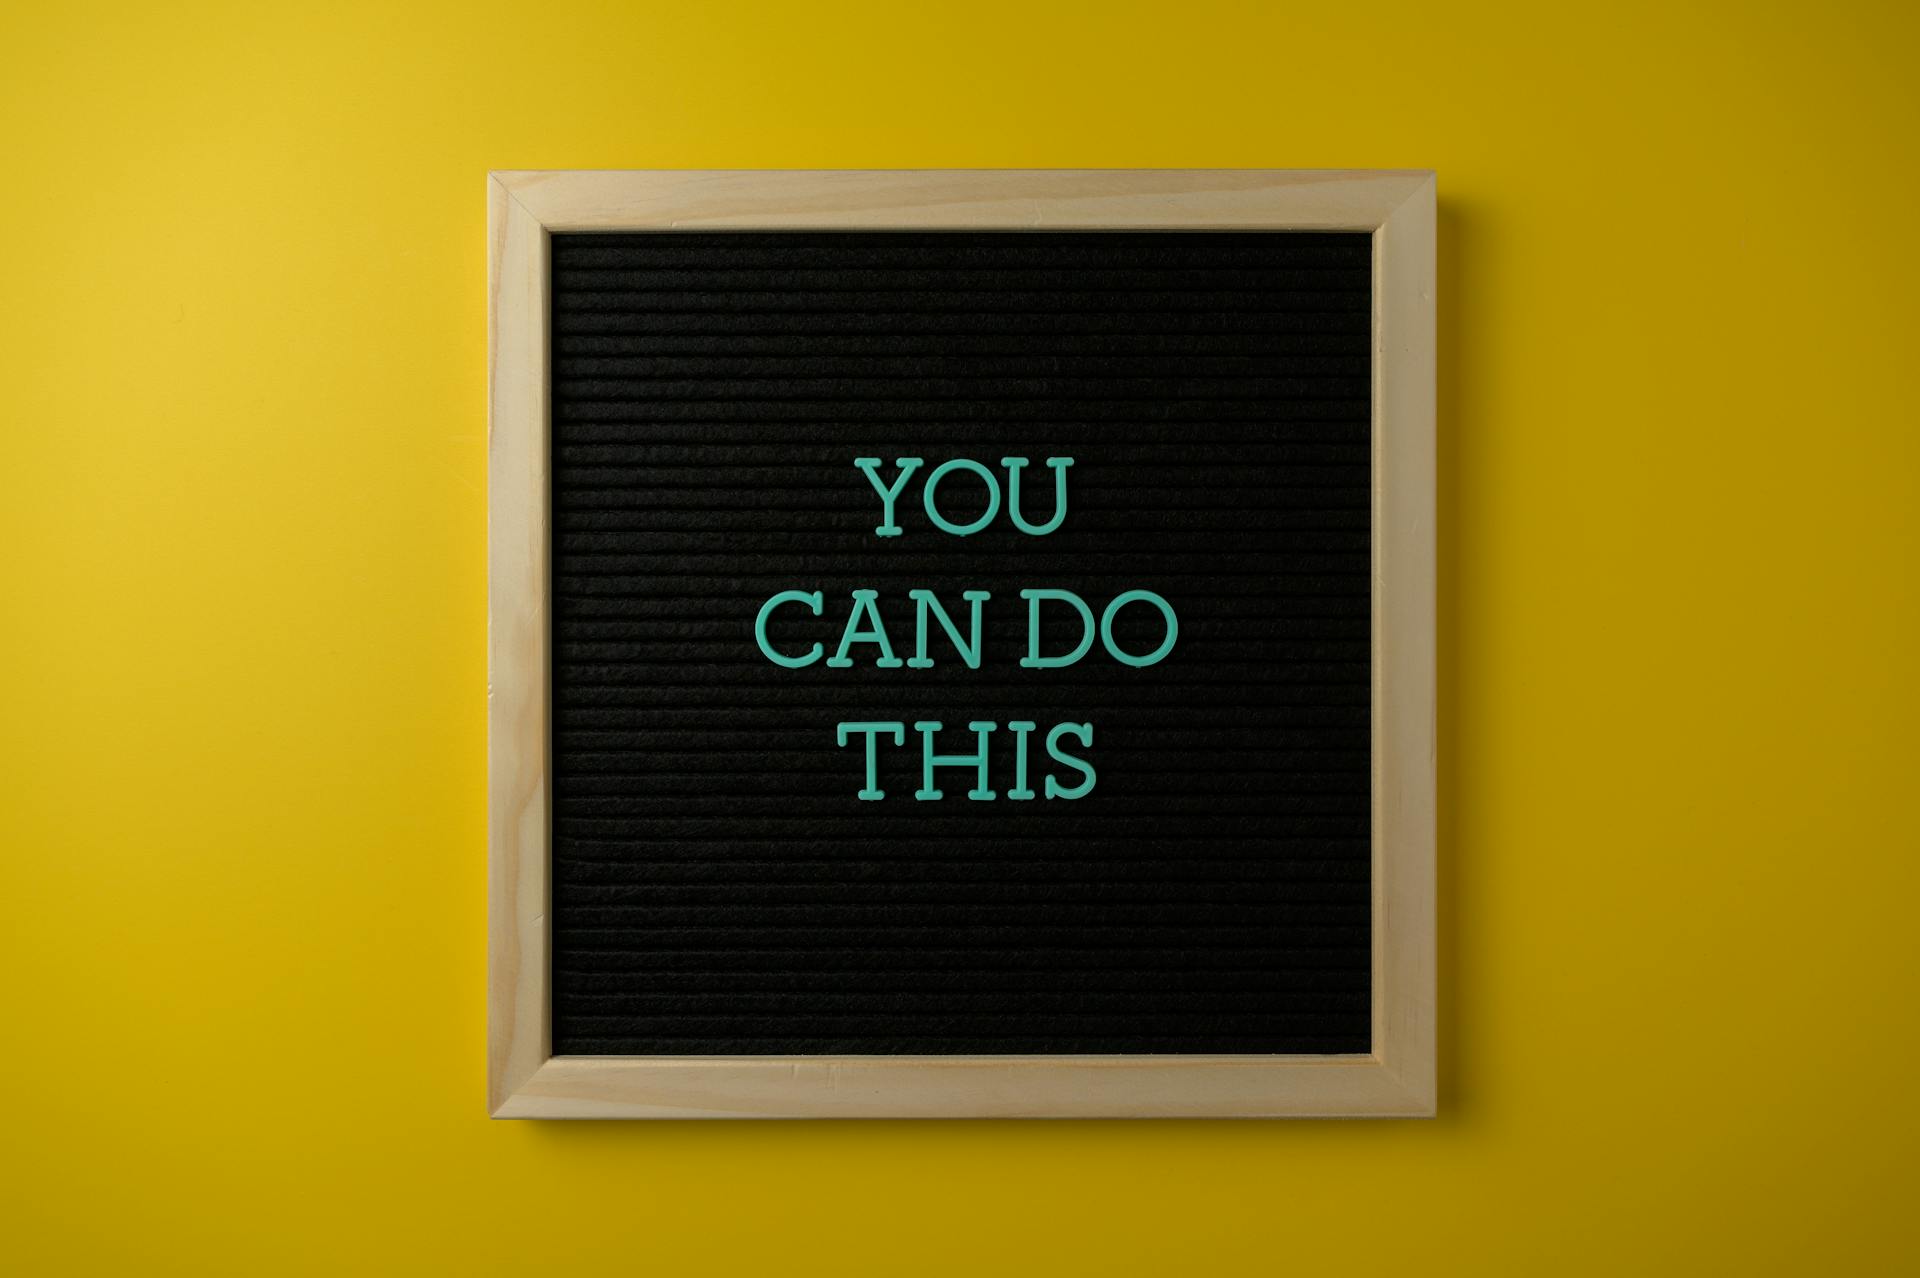 Framed Board with a Motivational Slogan on a Yellow Wall 